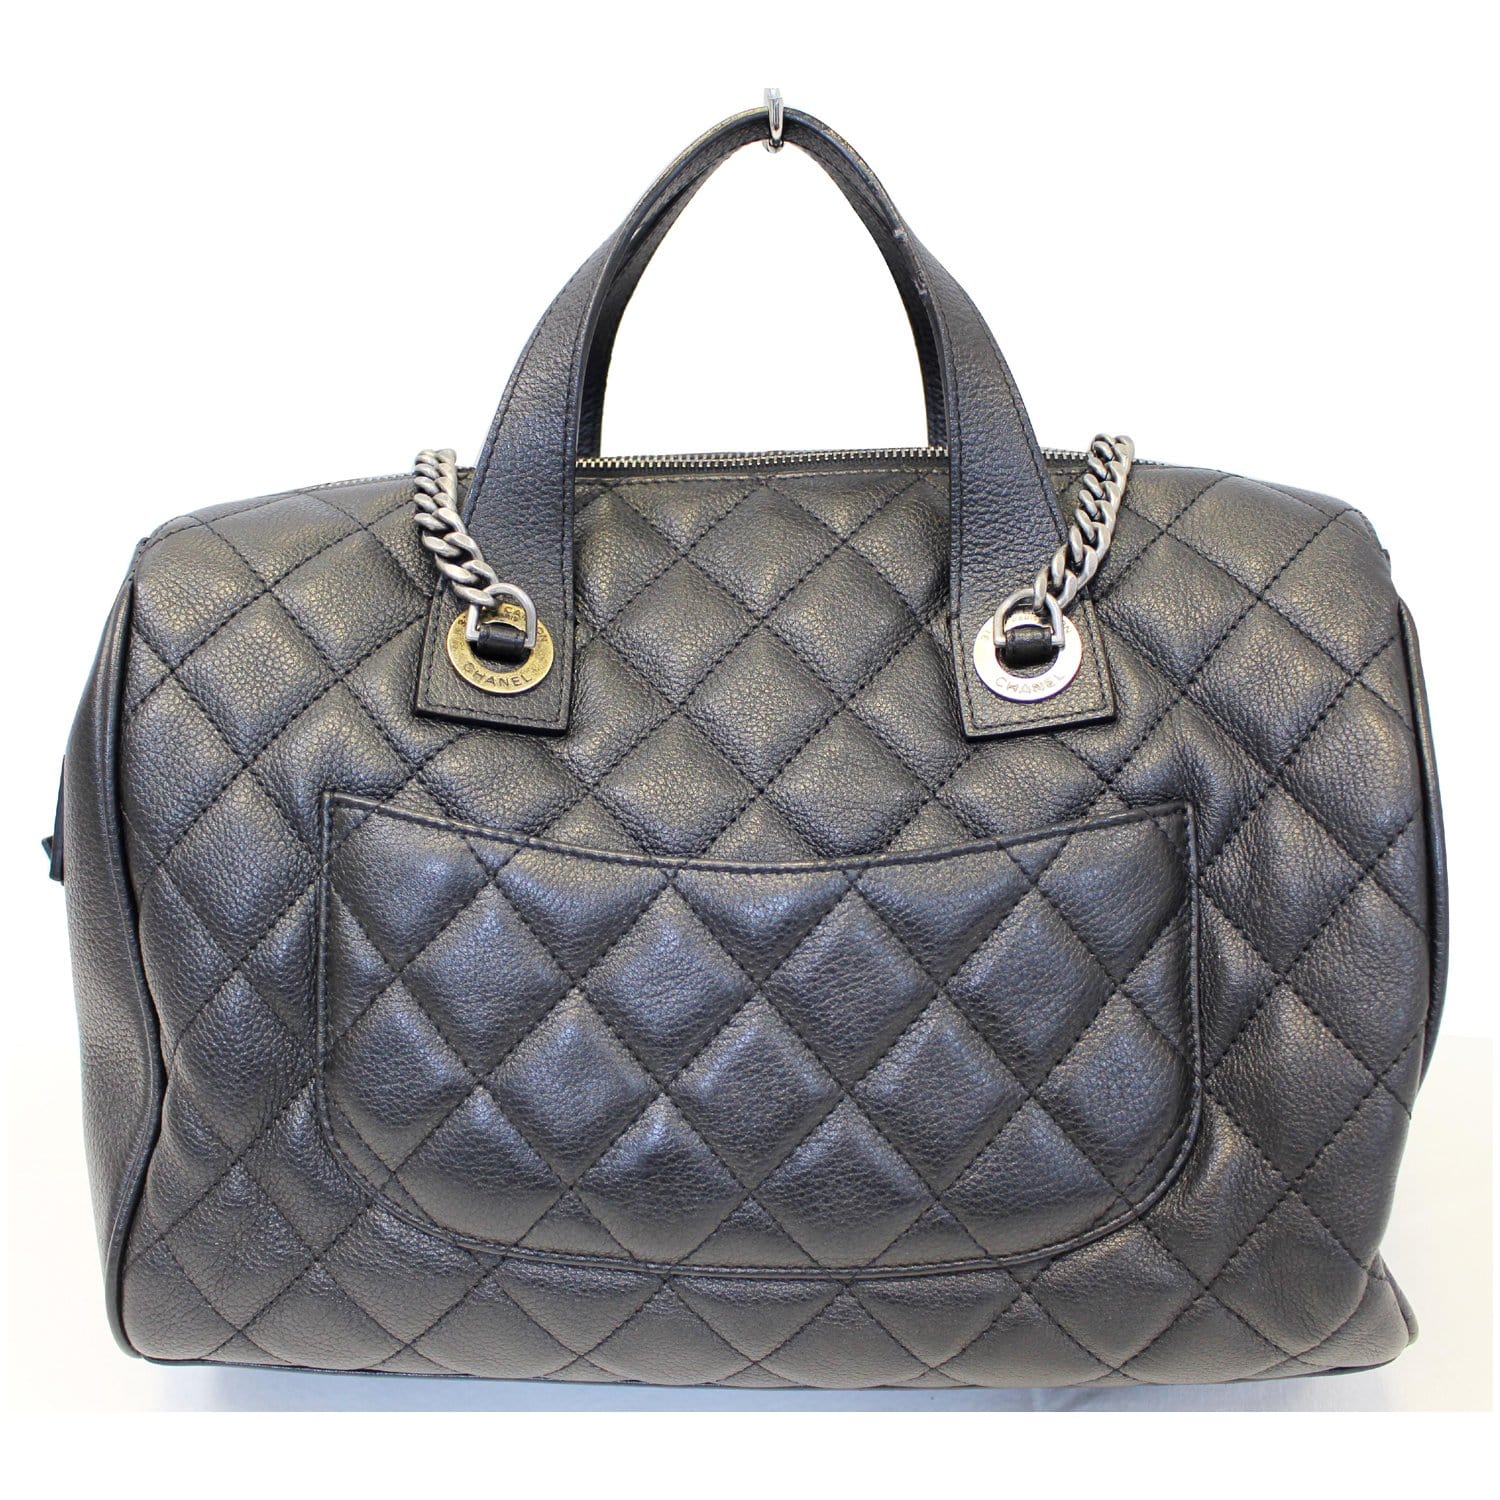 Chanel Gris Clair Quilted Iridescent Calfskin Leather Chic Quilt Large Bowling Bag